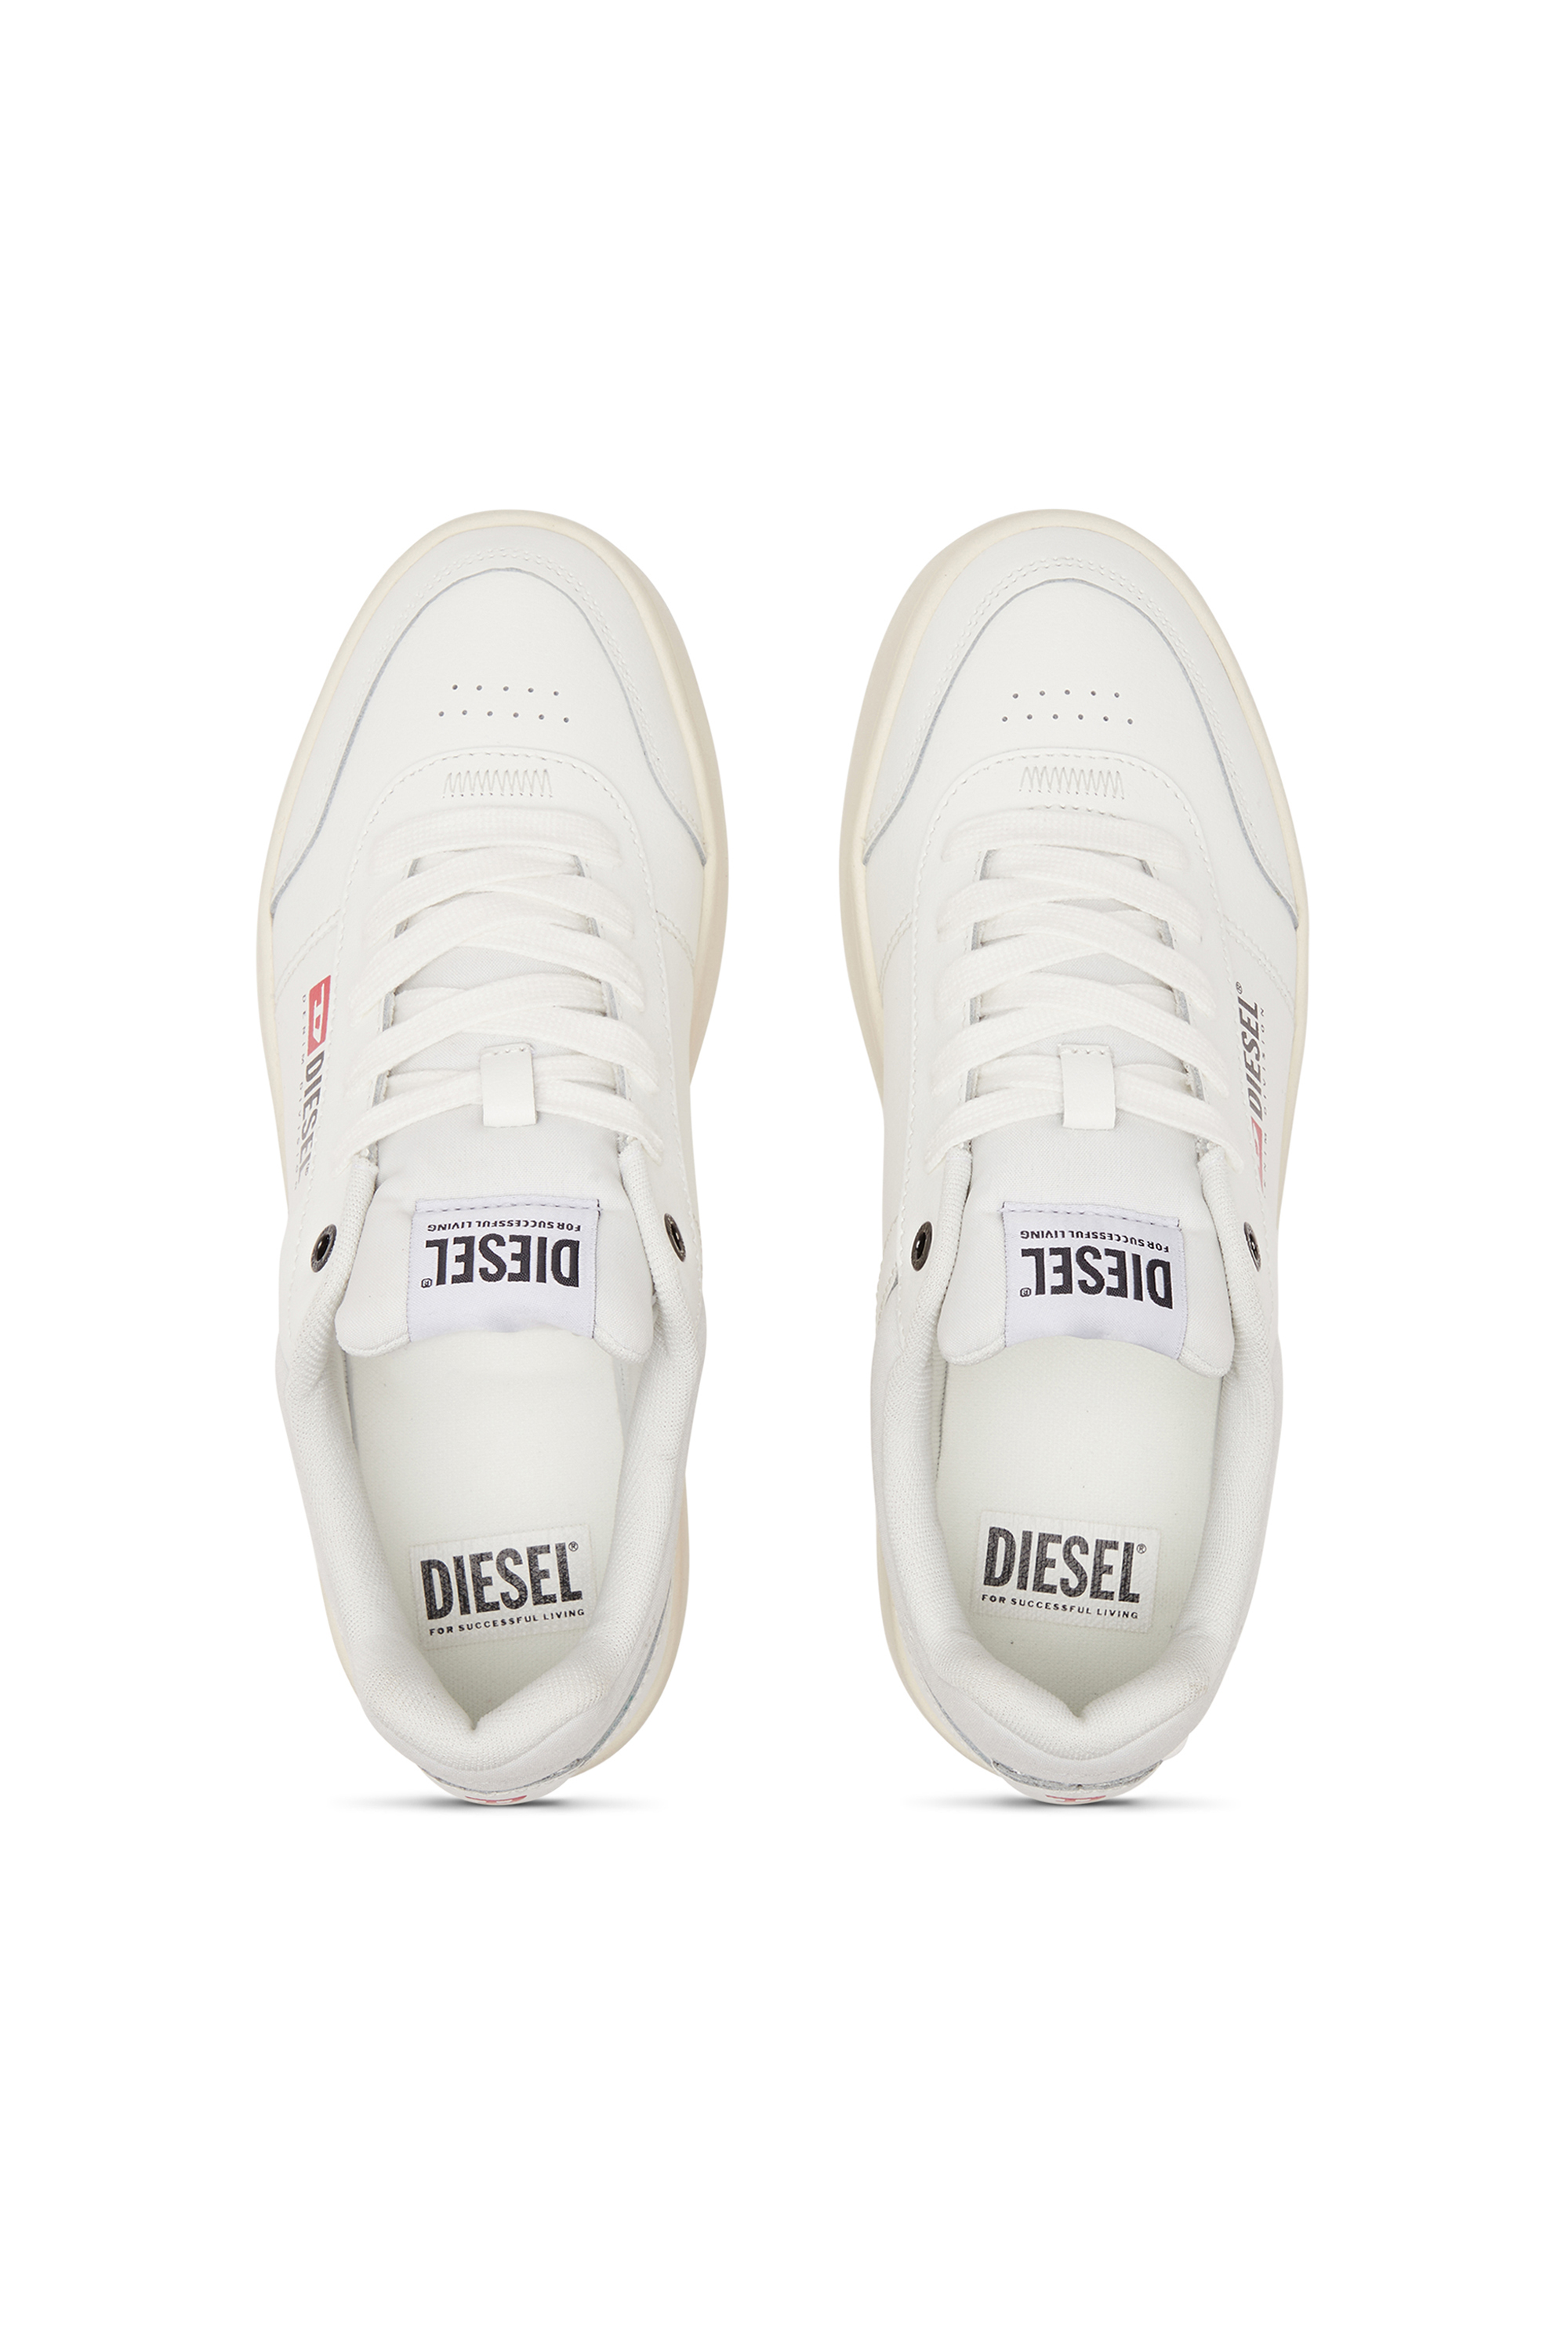 Diesel - S-ATHENE BOLD VTG W, Female S-Athene-Retro platform sneakers in leather in ホワイト - Image 5